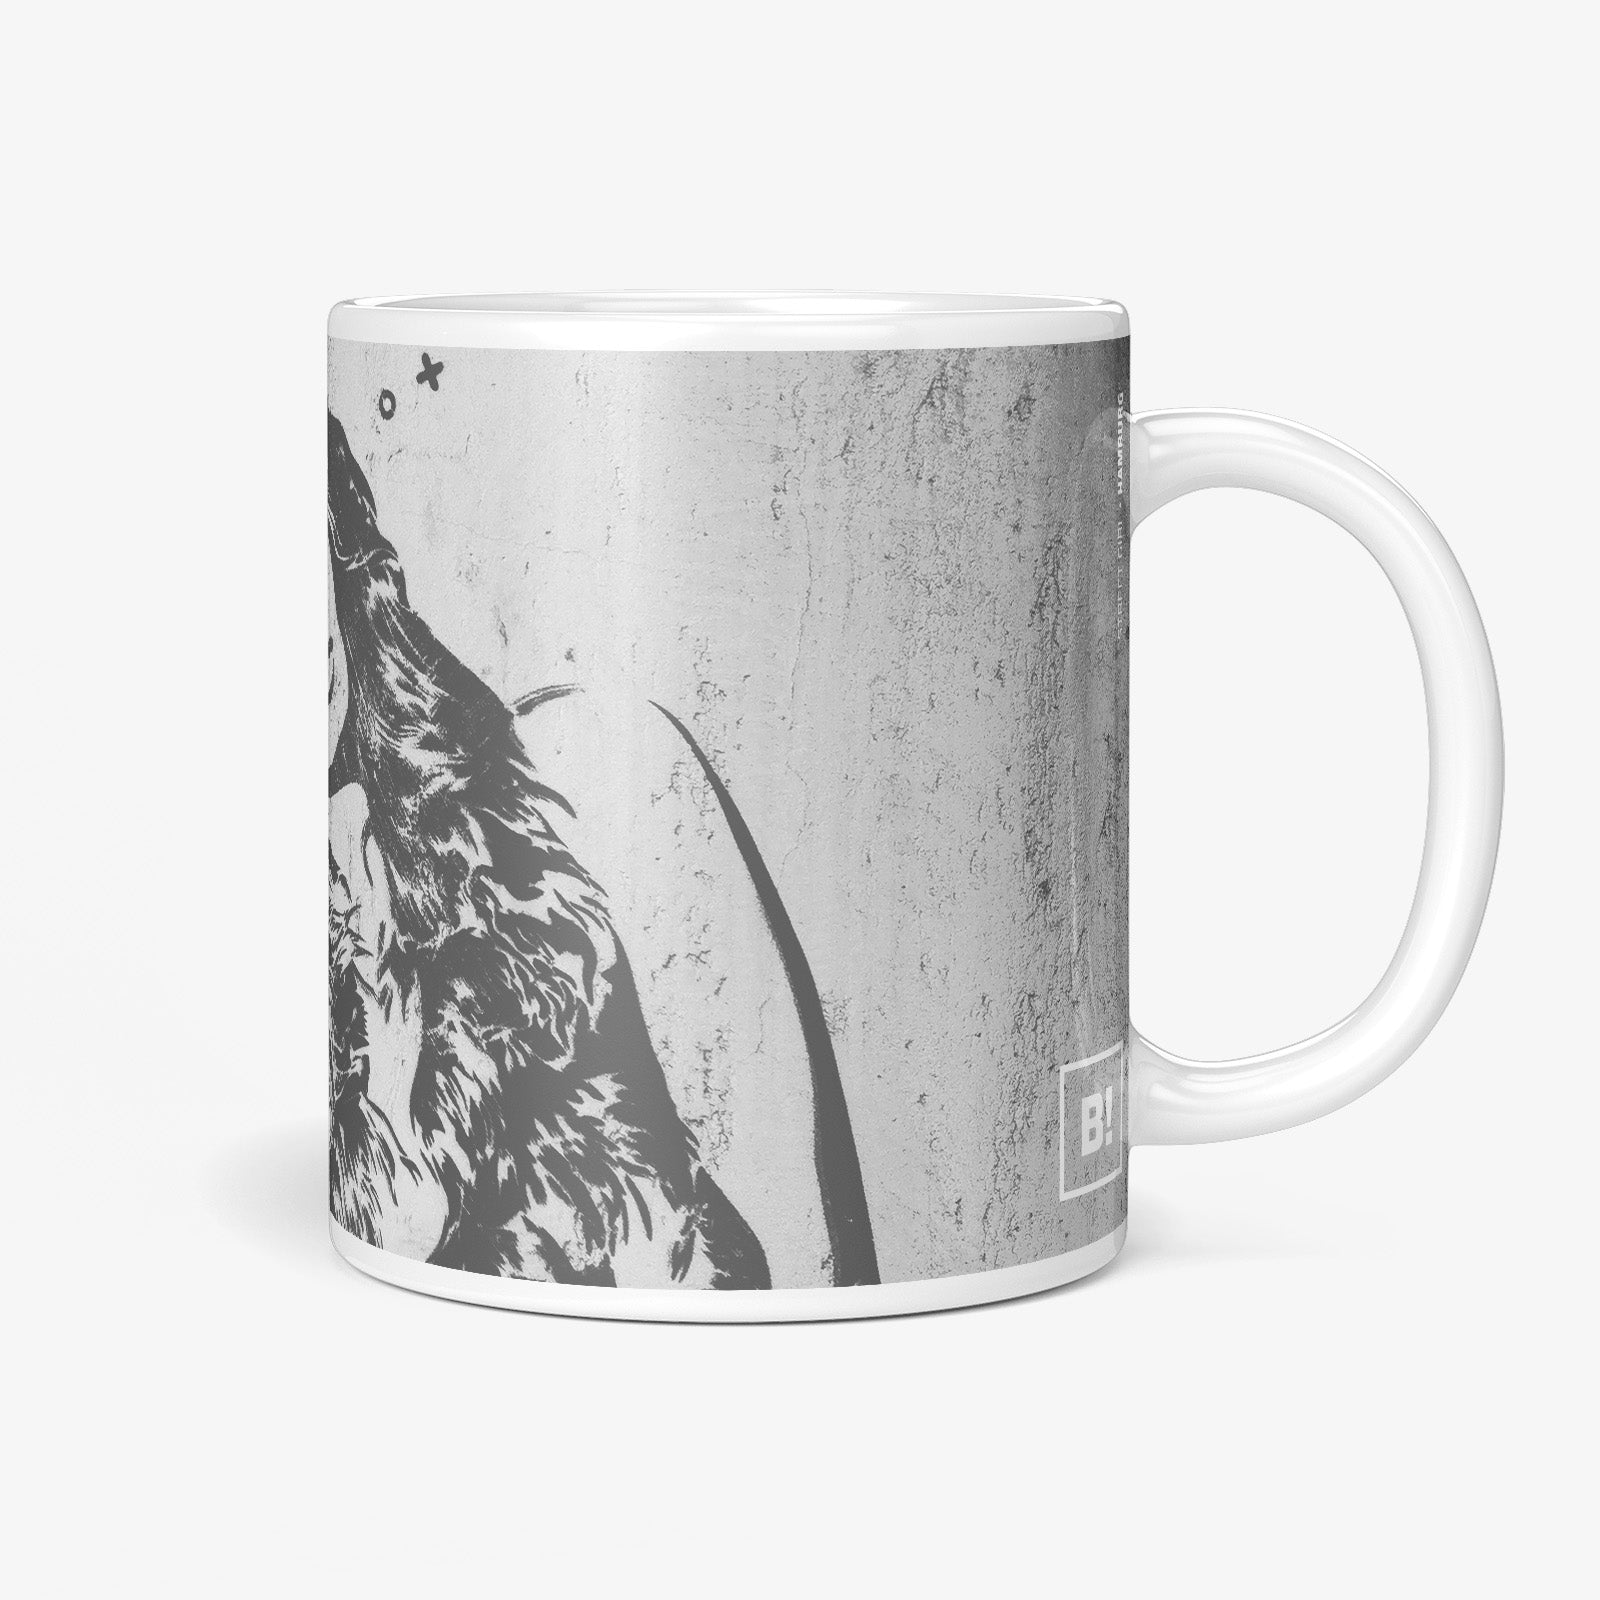 Be inspired by our Urban Art Coffee Mug "Street Girl" from Hamburg. This mug features an 11oz size with the handle on the right.